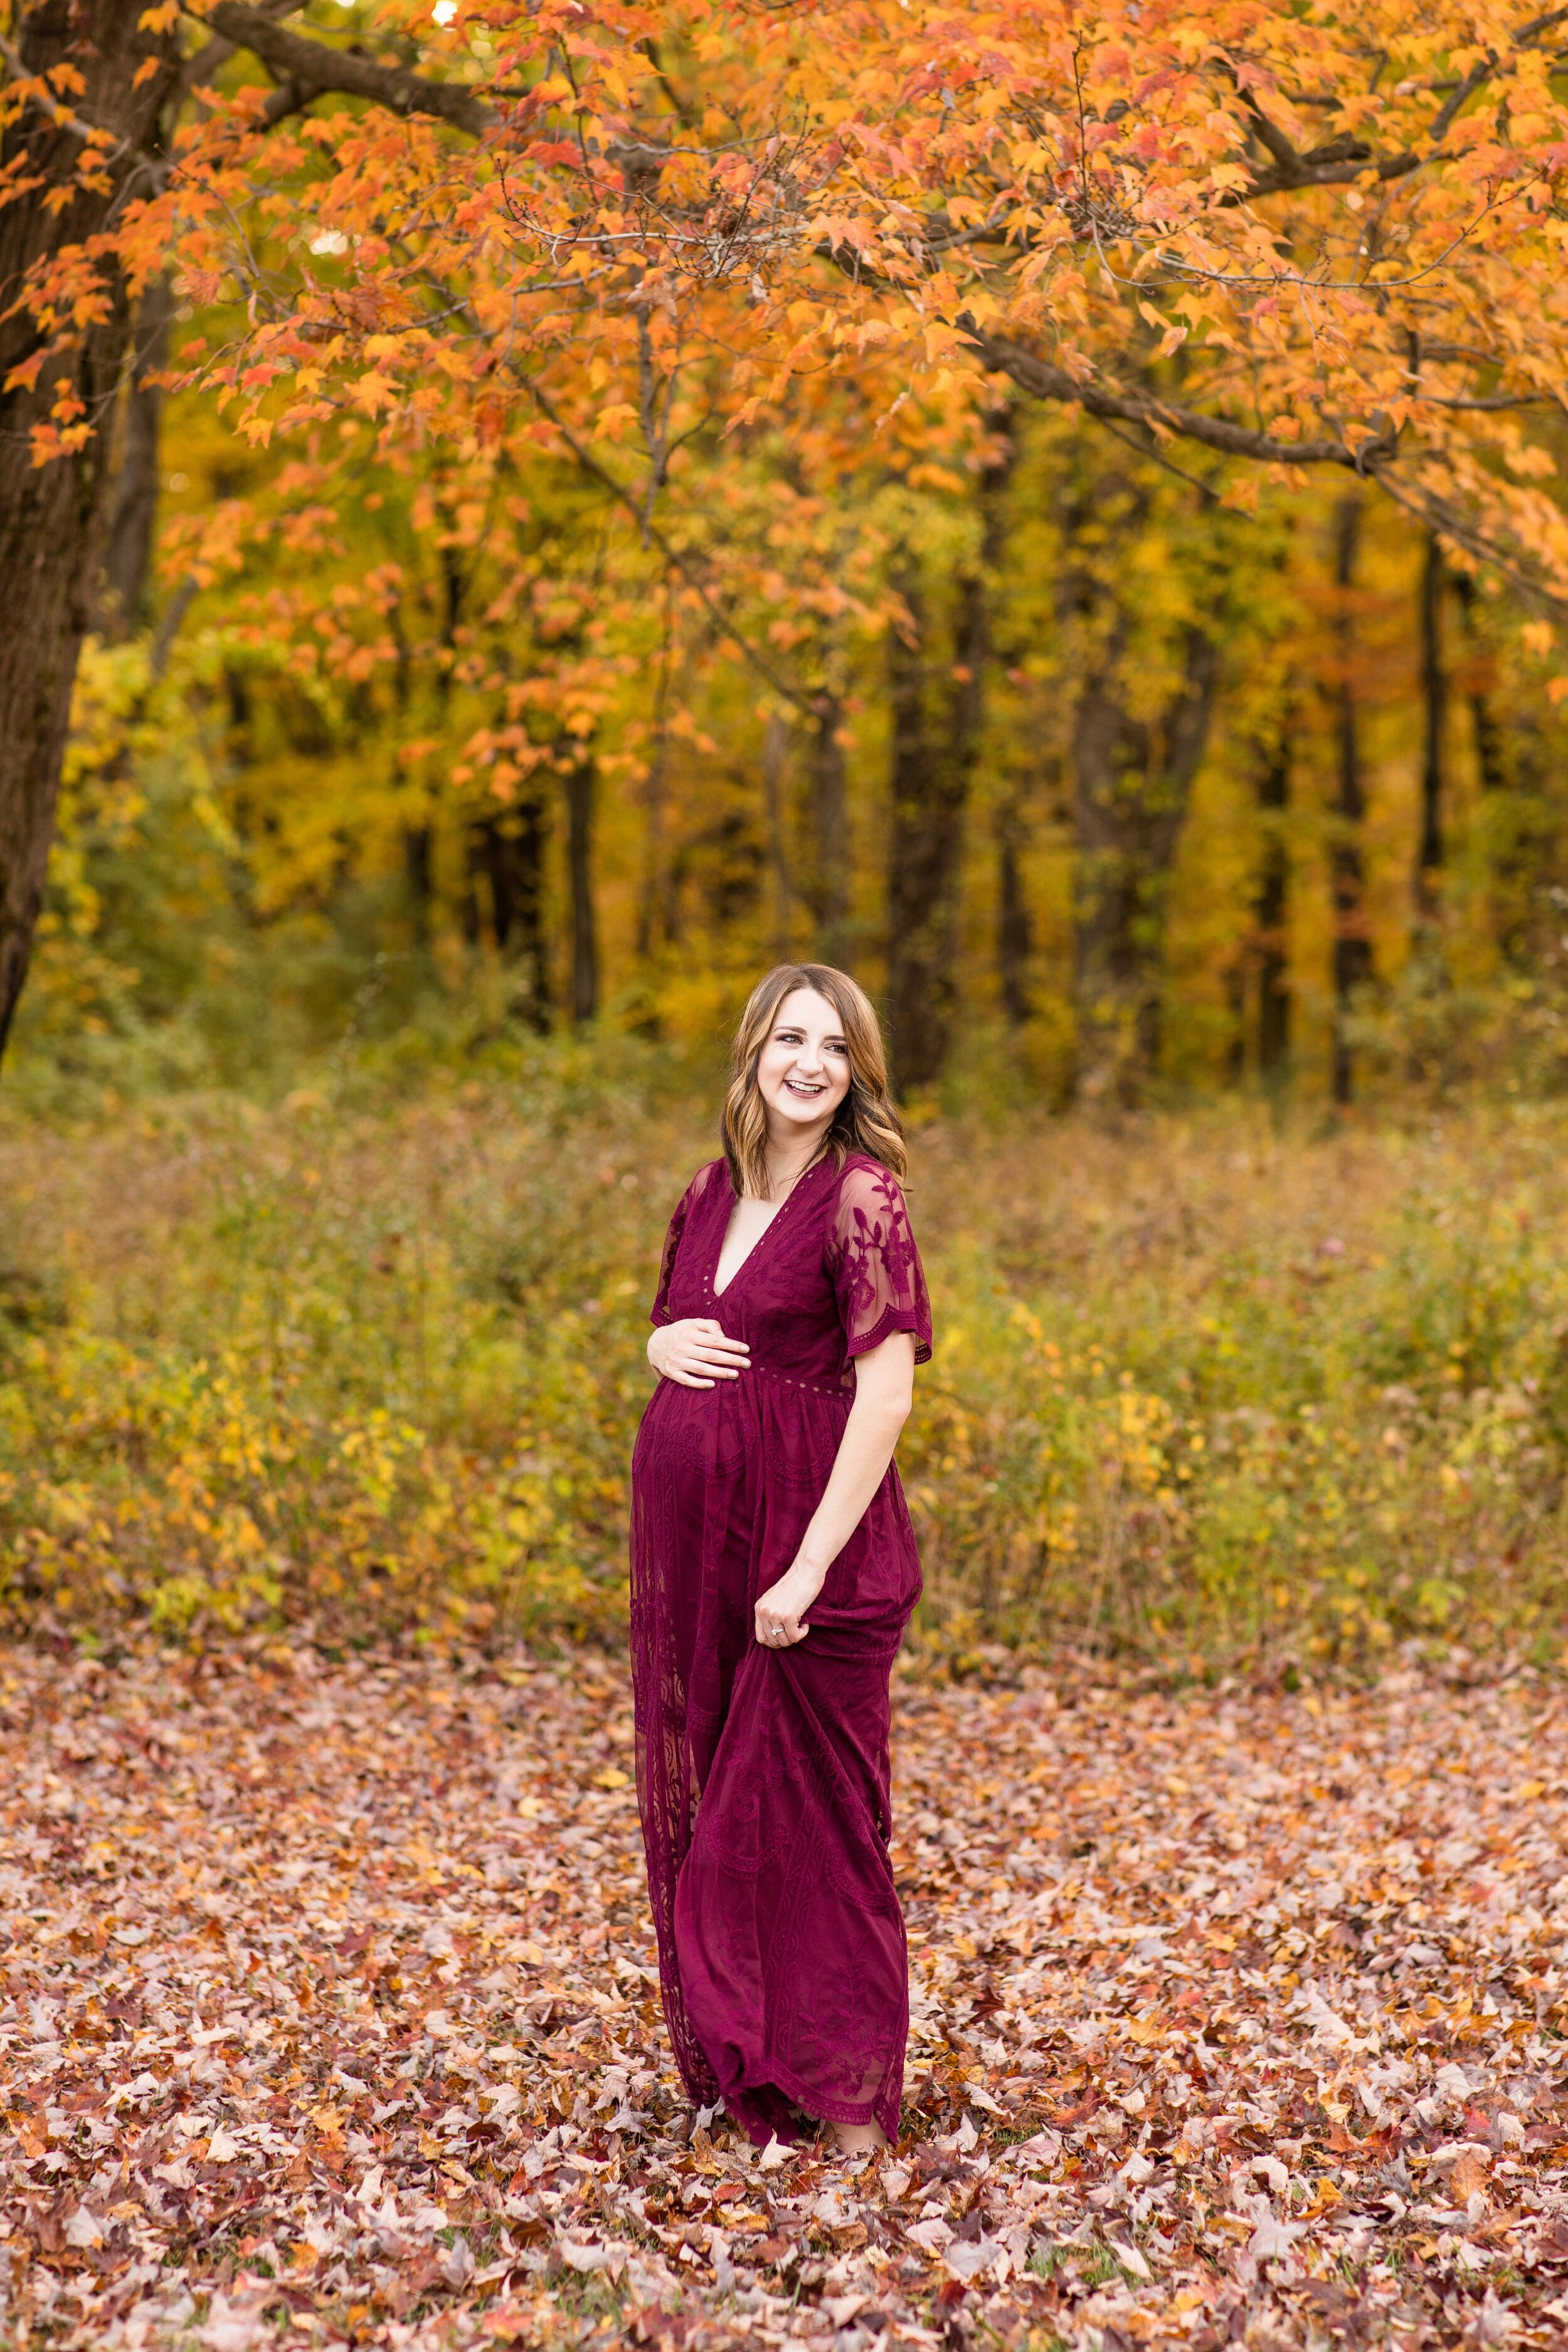 pittsburgh maternity photographer, pittsburgh family photographer, moraine state park family photos, mcconnells mill family photos, cranberry township photographer, what to wear for maternity photos